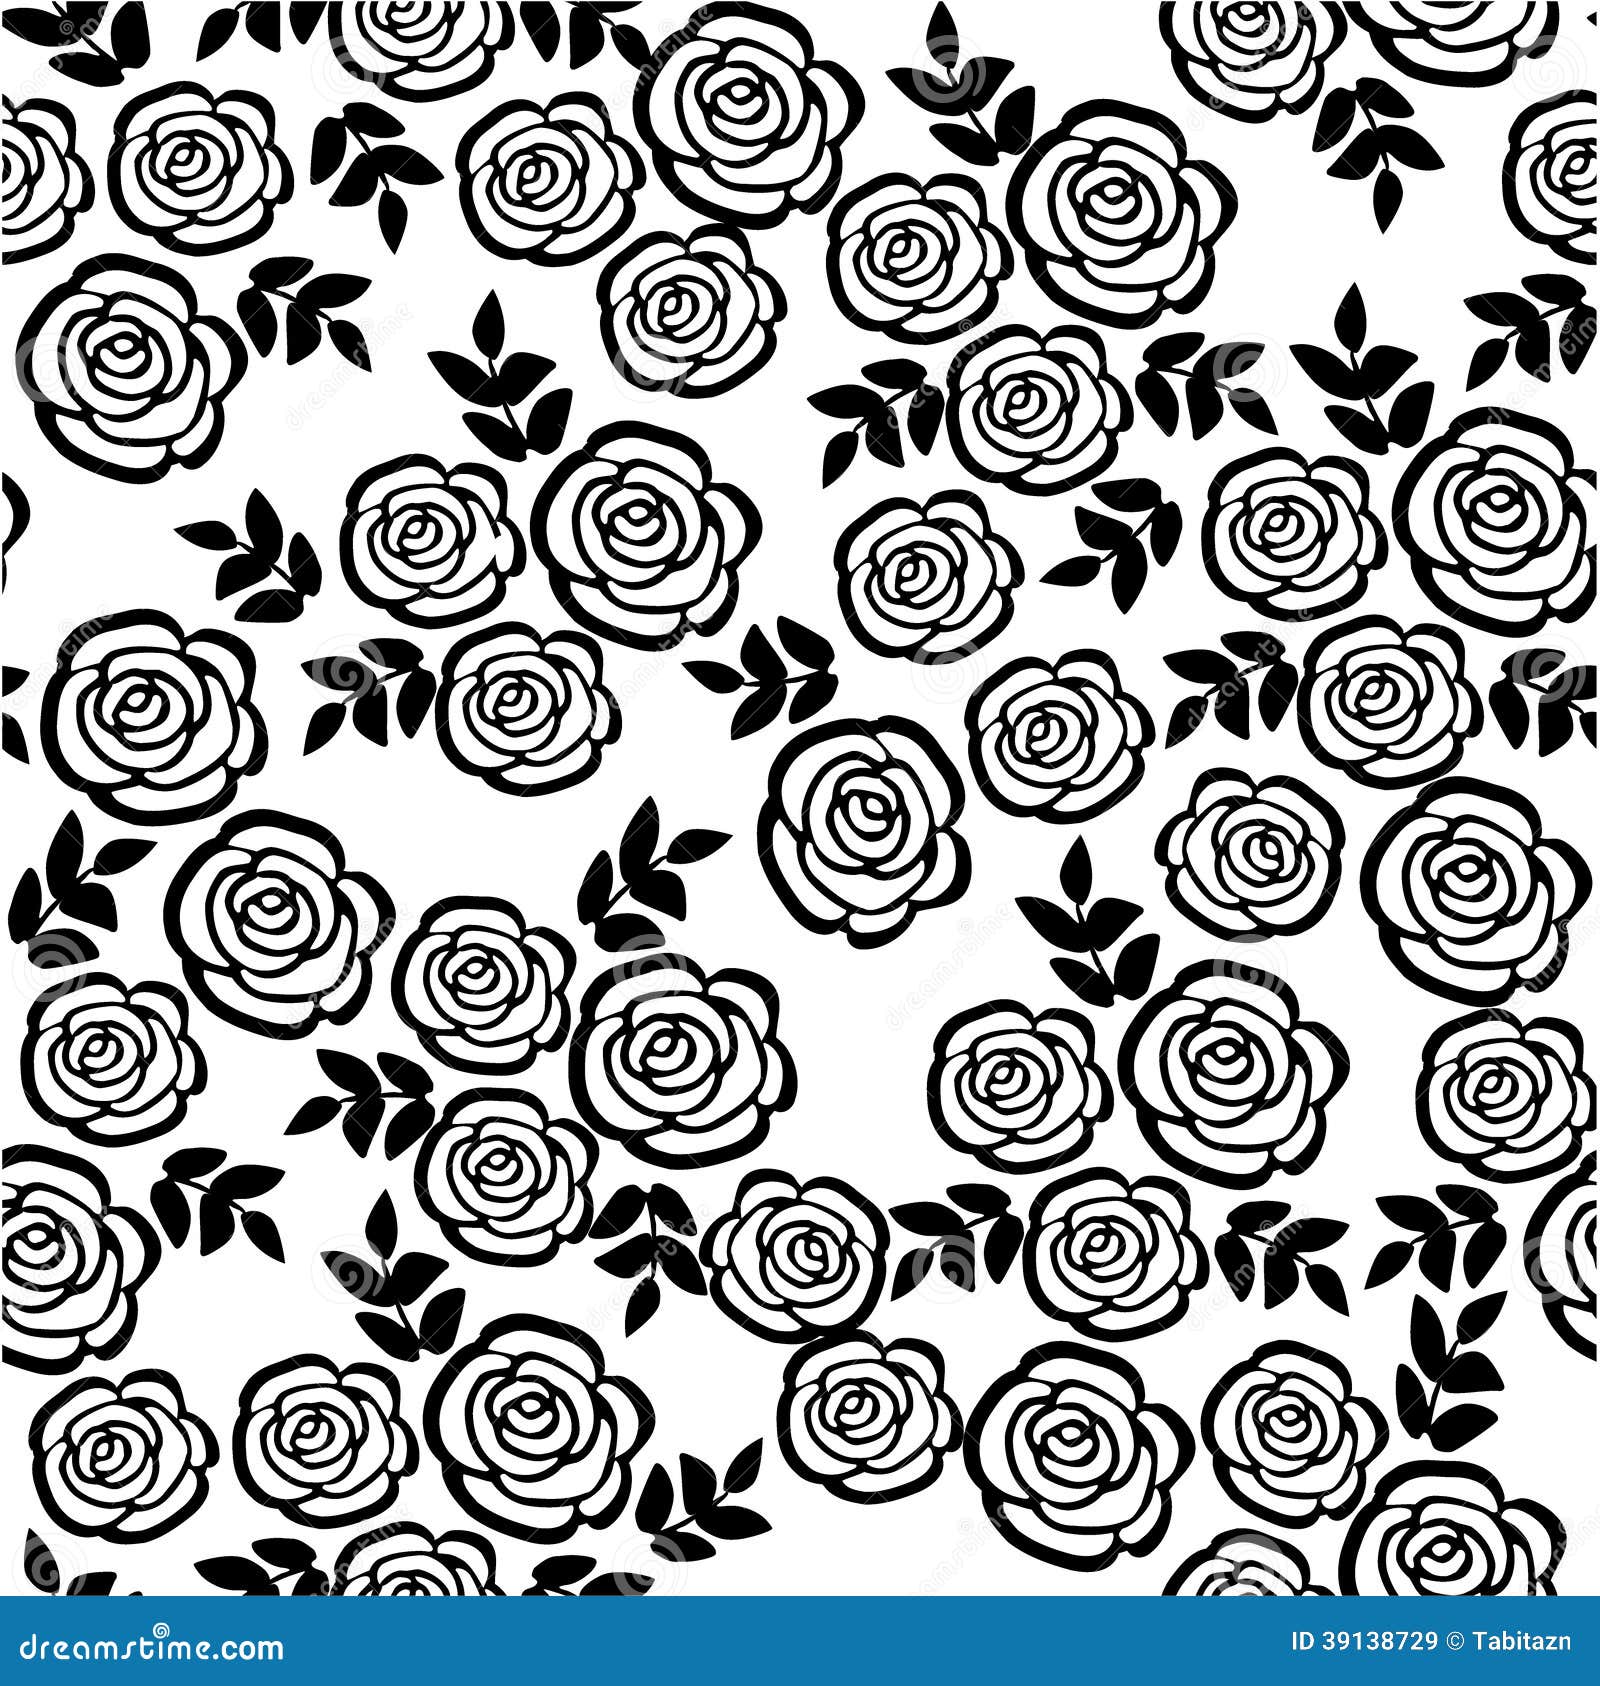 Good Looking cute patterns black and white Seamless Pattern With Roses Floral Background Stock Vector Illustration Of Beauty Element 39138729